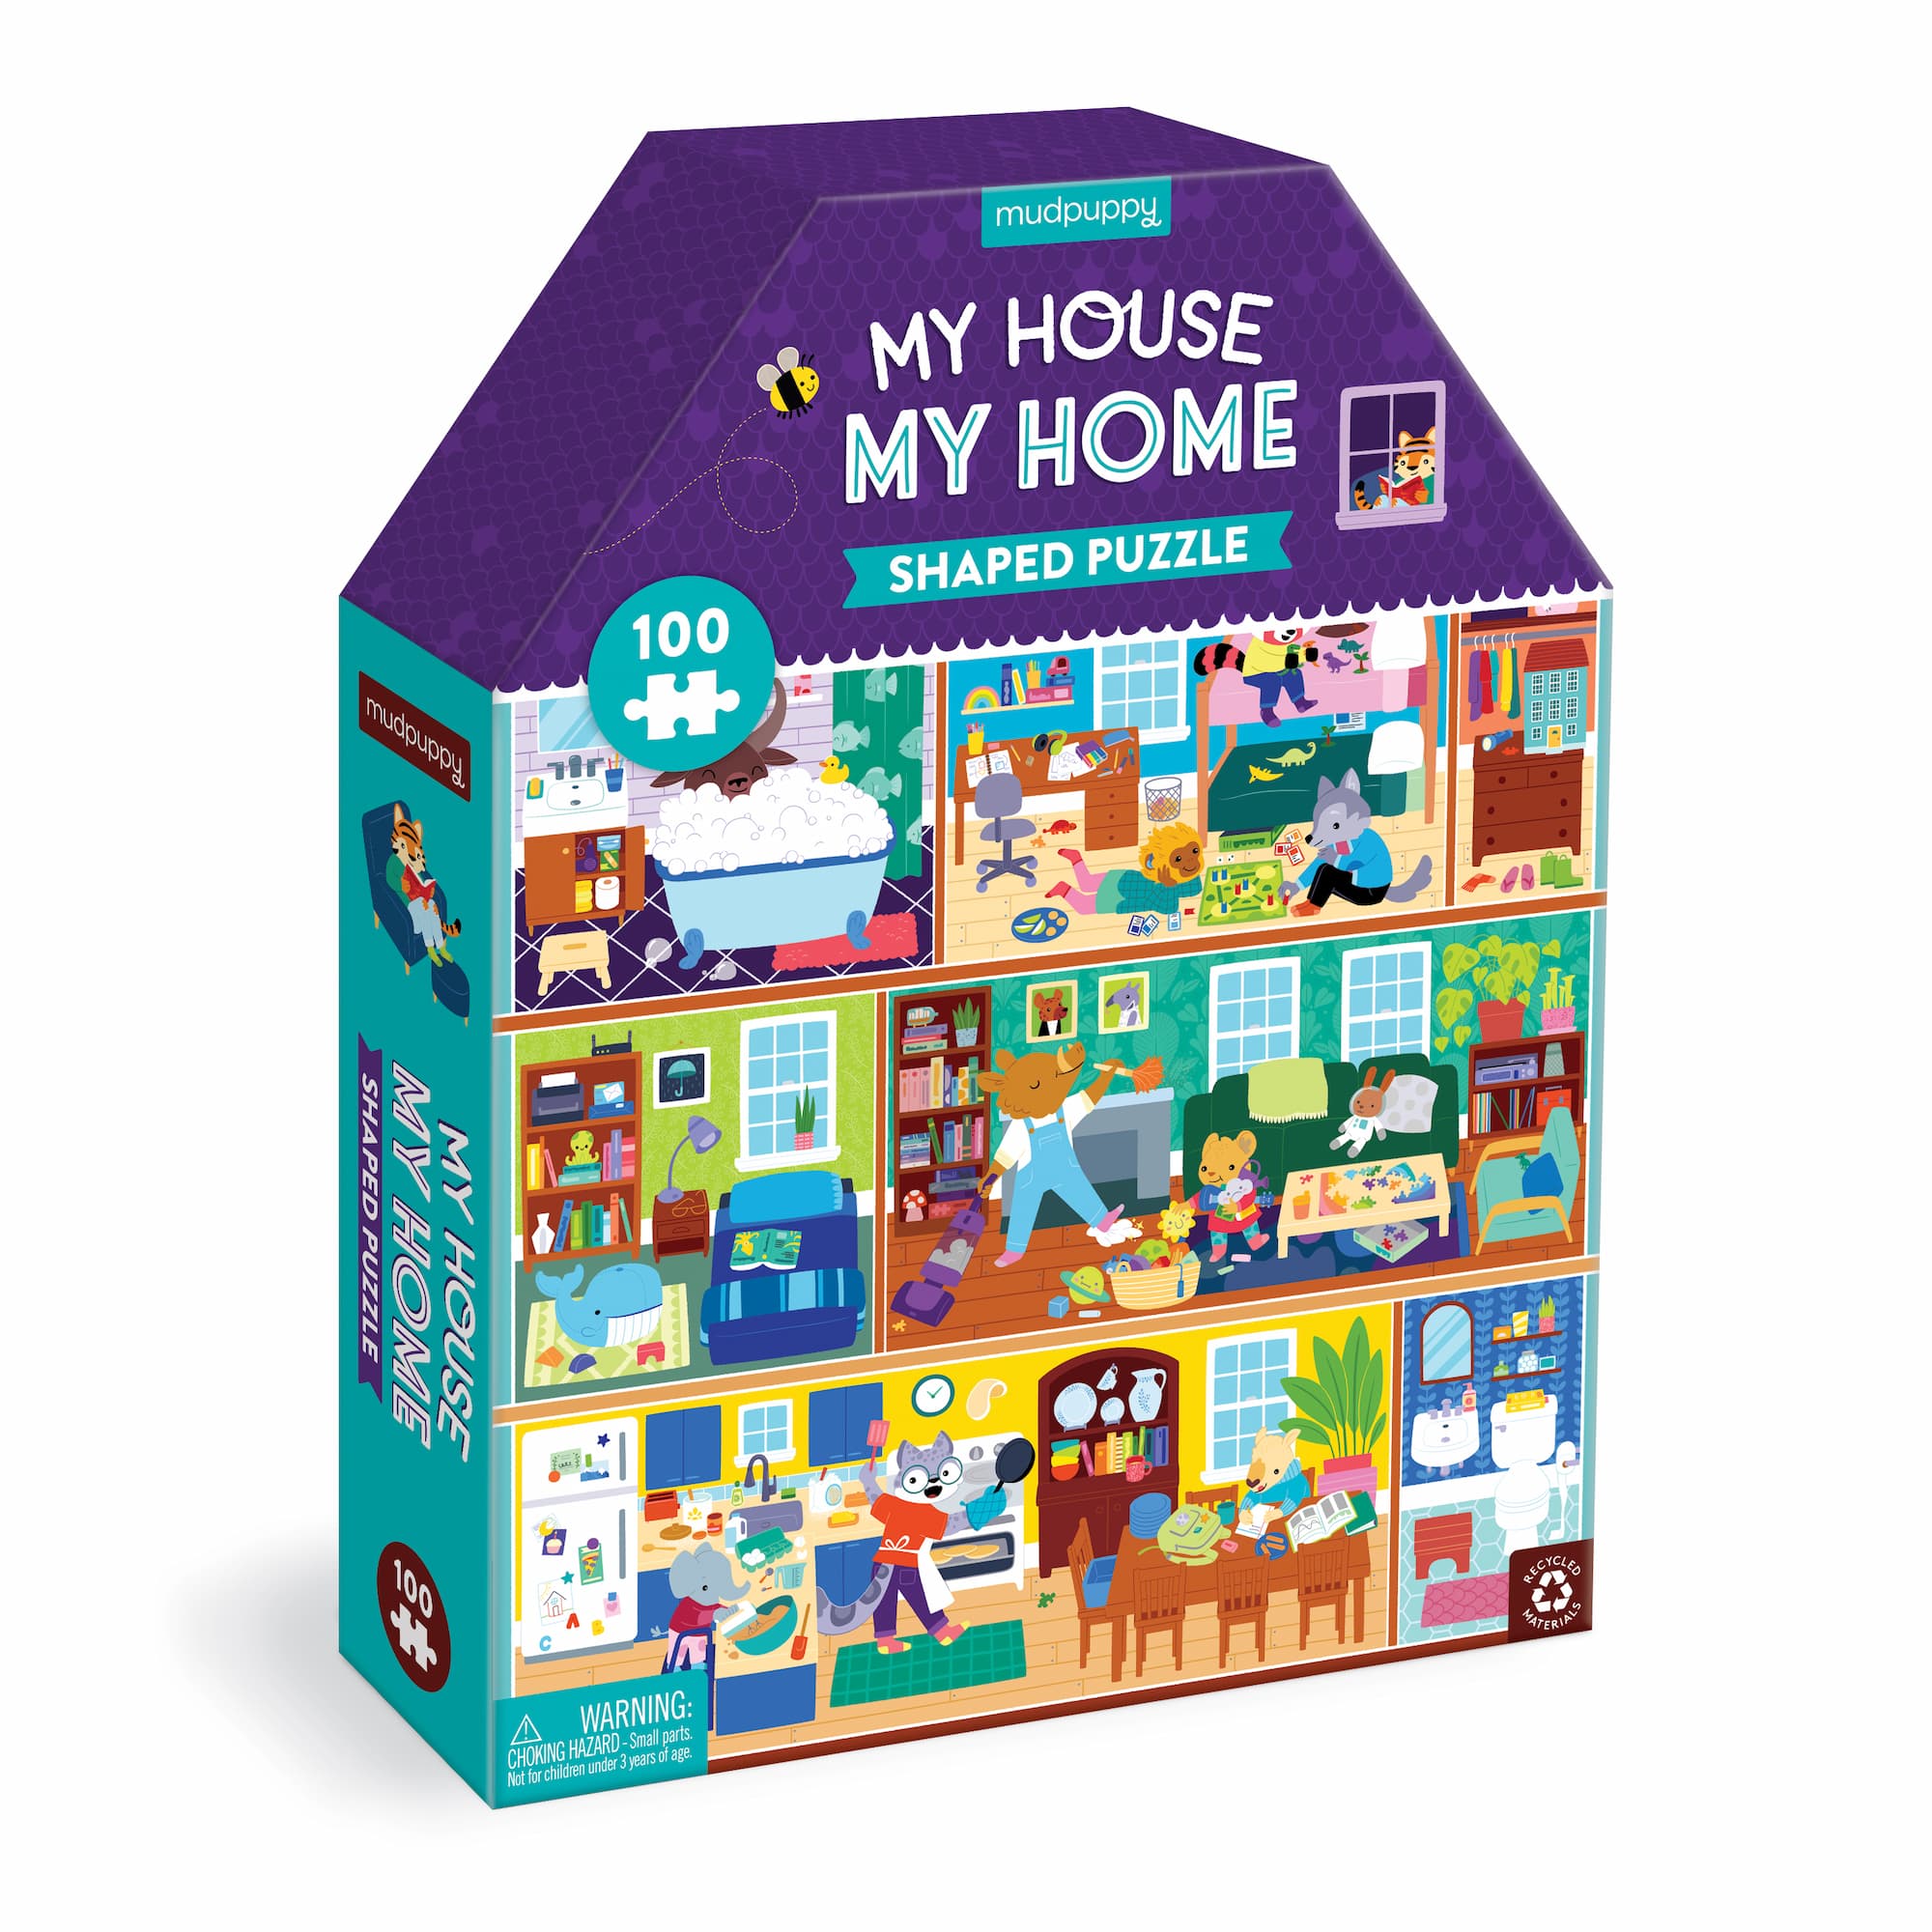 This is my Story This is my Song Puzzle - Fancy That Design House & Co.